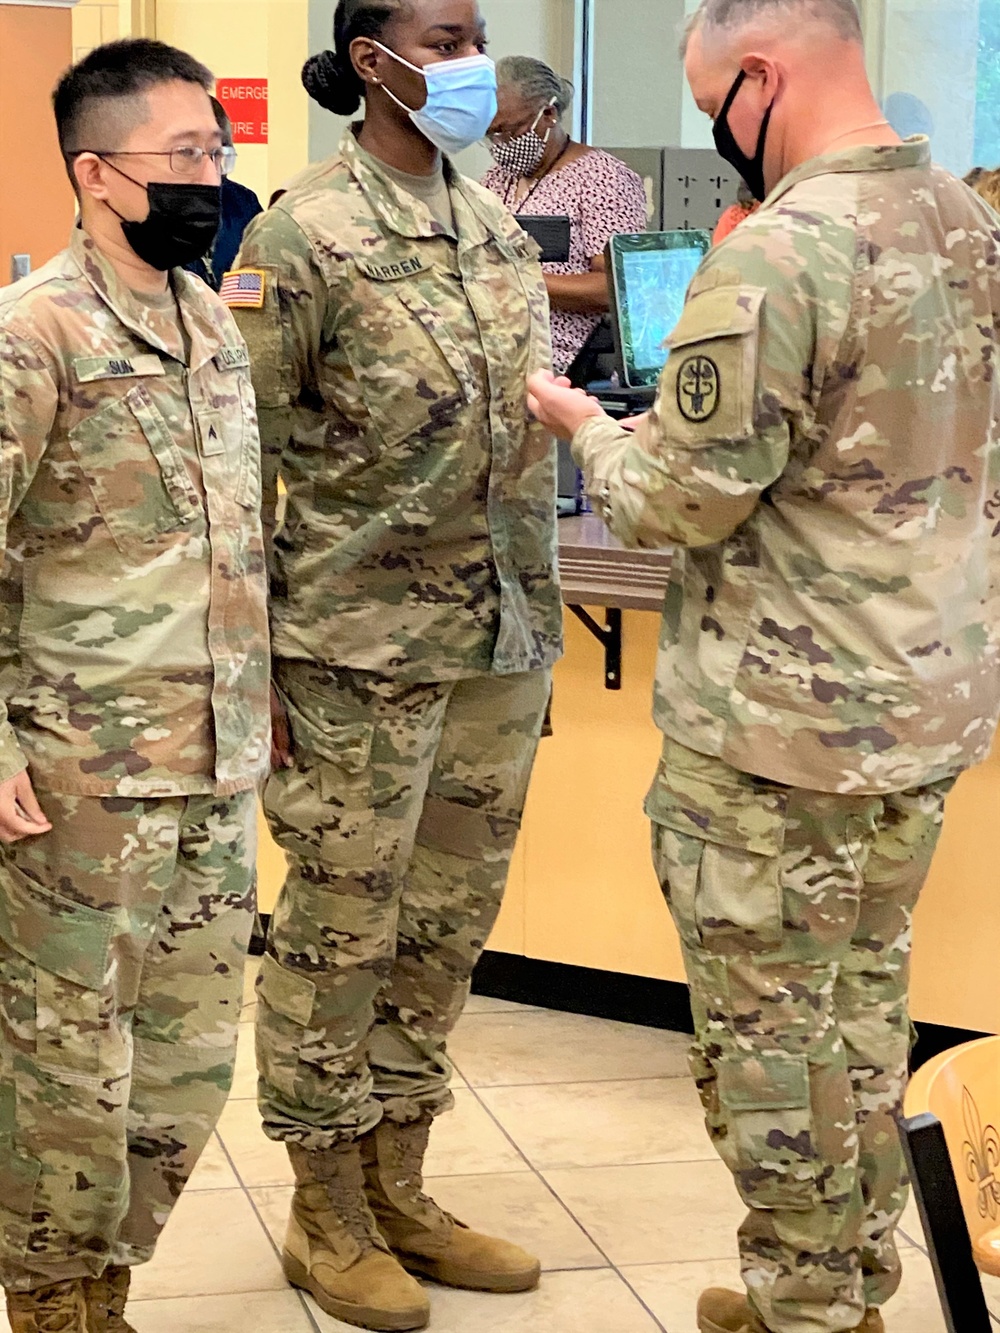 BJACH appoints eligible specialists to corporal during Army Birthday Celebration